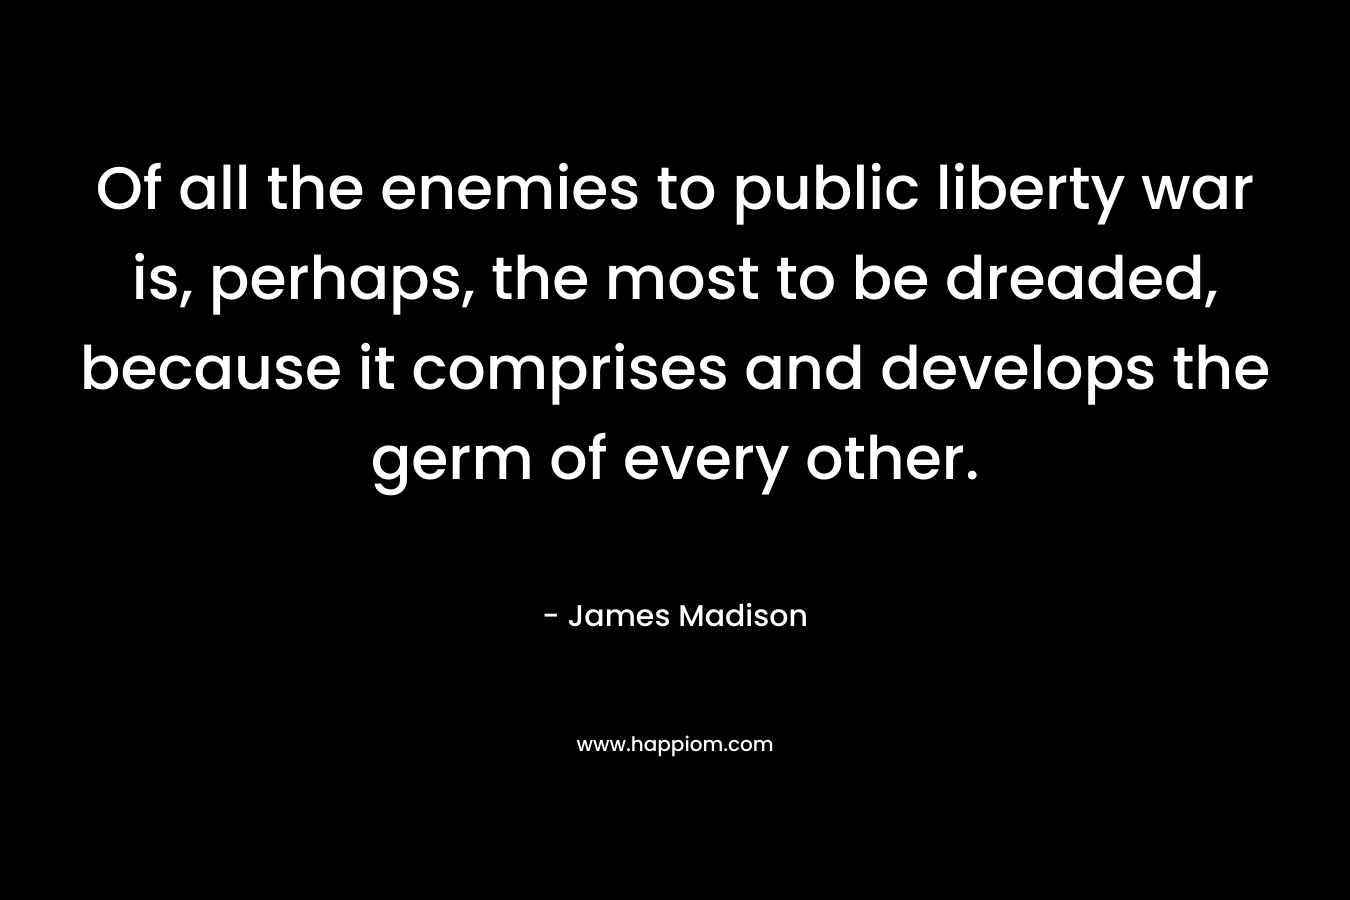 Of all the enemies to public liberty war is, perhaps, the most to be dreaded, because it comprises and develops the germ of every other.